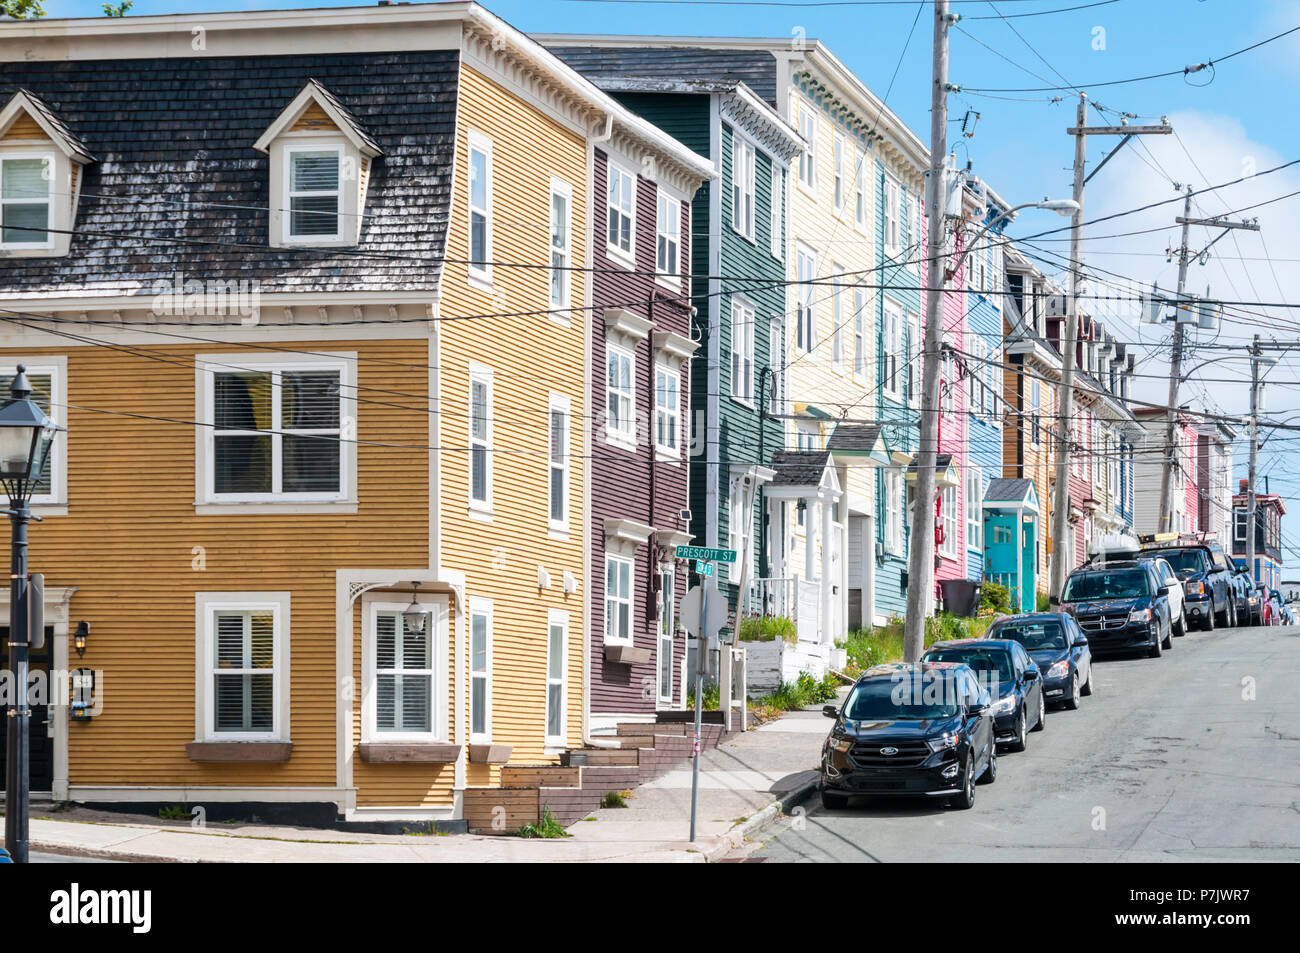 Jellybean Row or colourful houses on the corner of Gower Street and Prescott Street in St John's, Newfoundland Stock Photo